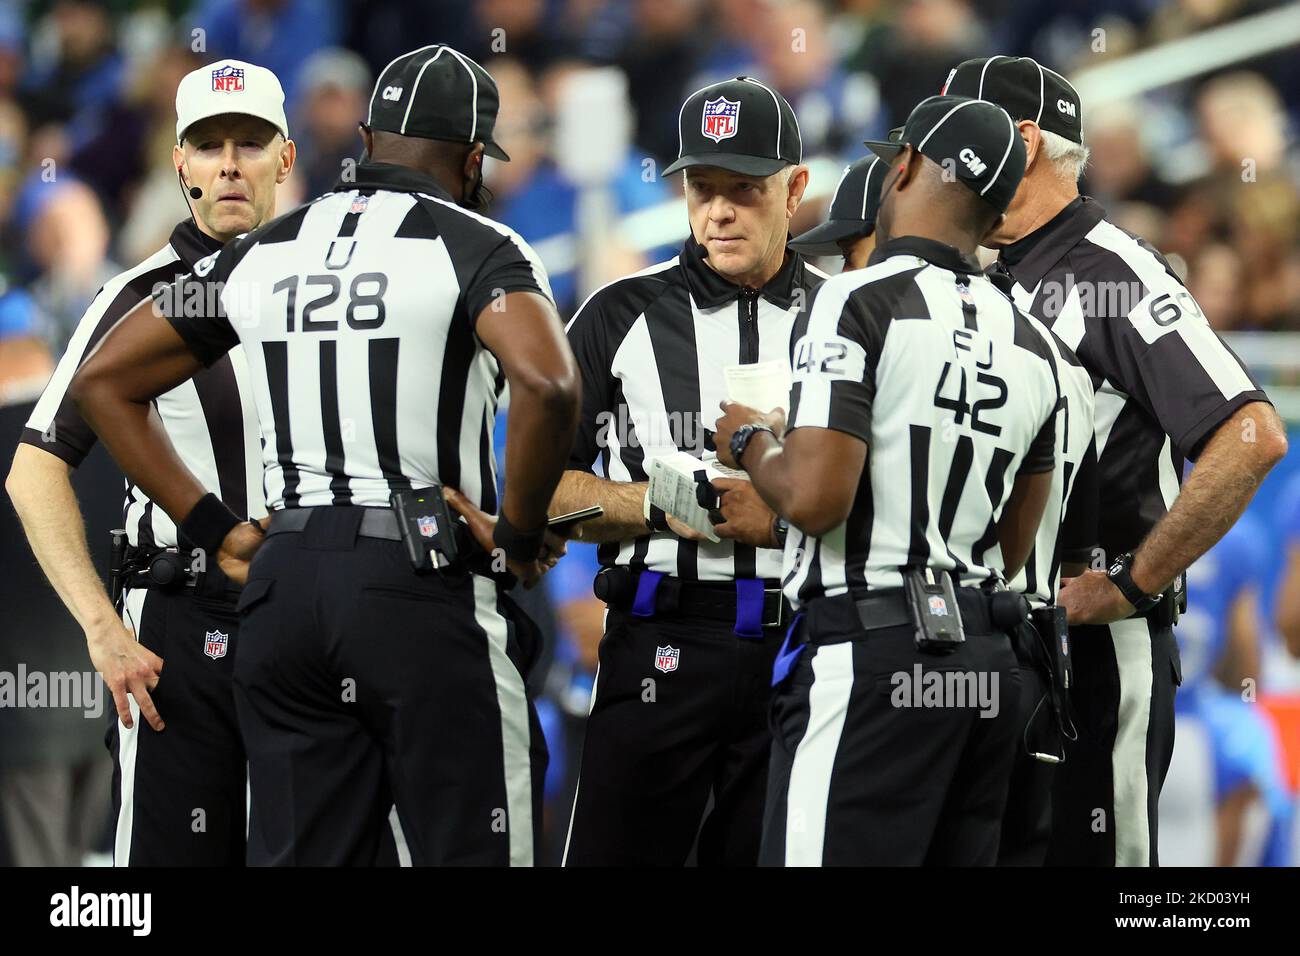 Officials including umpire Ramon George (128), field judge Nate Jones (42), down judge Derick Bowers (74), back judge Terrence Miles (111), line judge Walt Coleman IV (65), and side judge Gary Cavaletto (60) gather to discuss between plays during an NFL football game between the Detroit Lions and the Green Bay Packers in Detroit, Michigan USA, on Sunday, January 9, 2022. (Photo by Amy Lemus/NurPhoto) Stock Photo